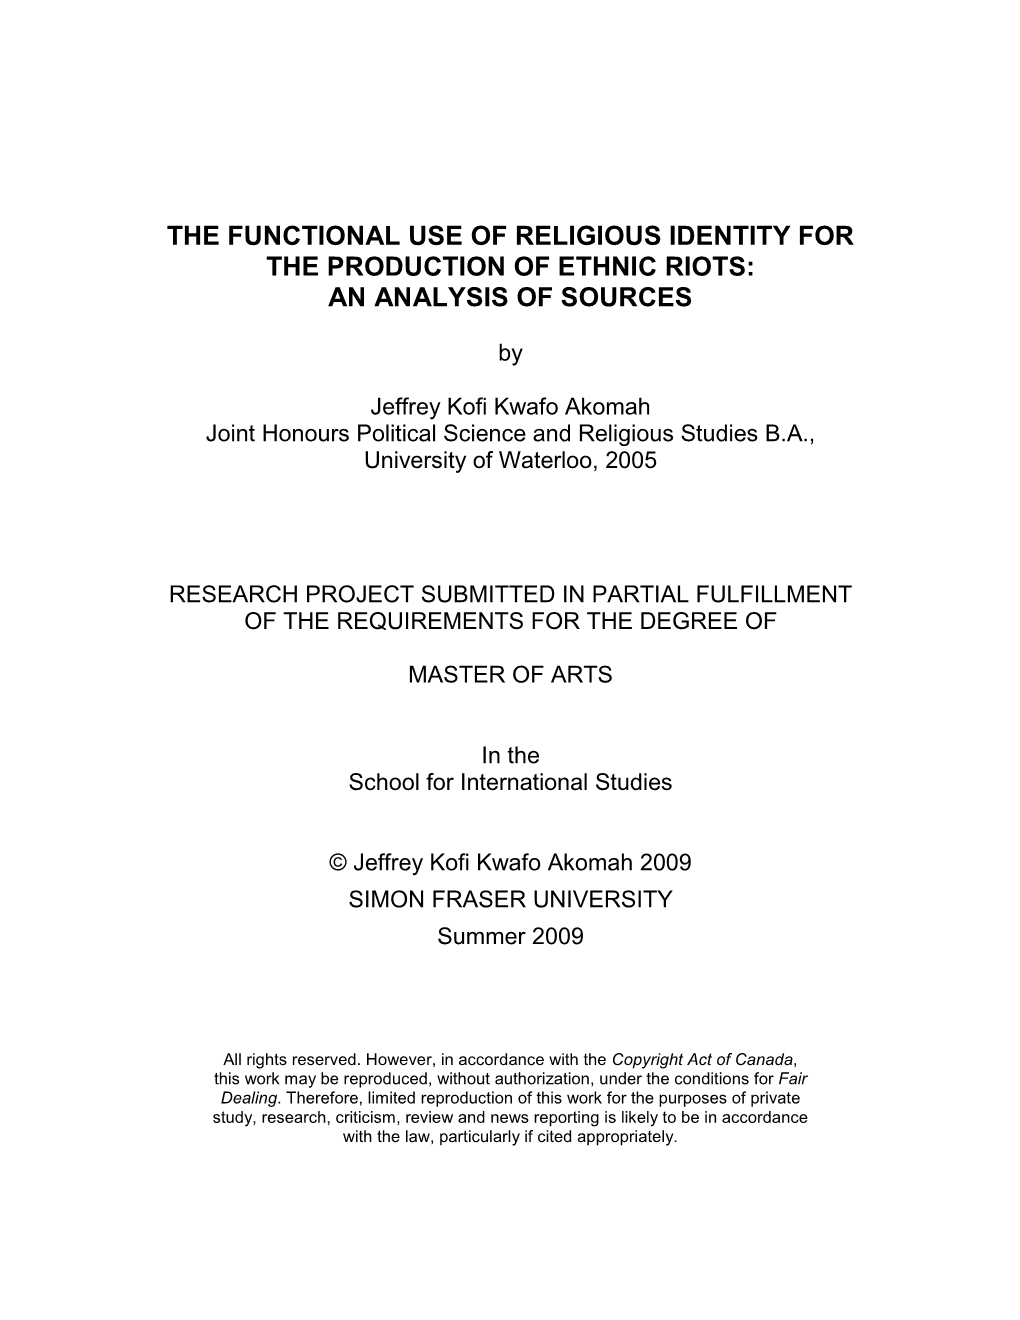 The Functional Use of Religious Identity for the Production of Ethnic Riots: an Analysis of Sources